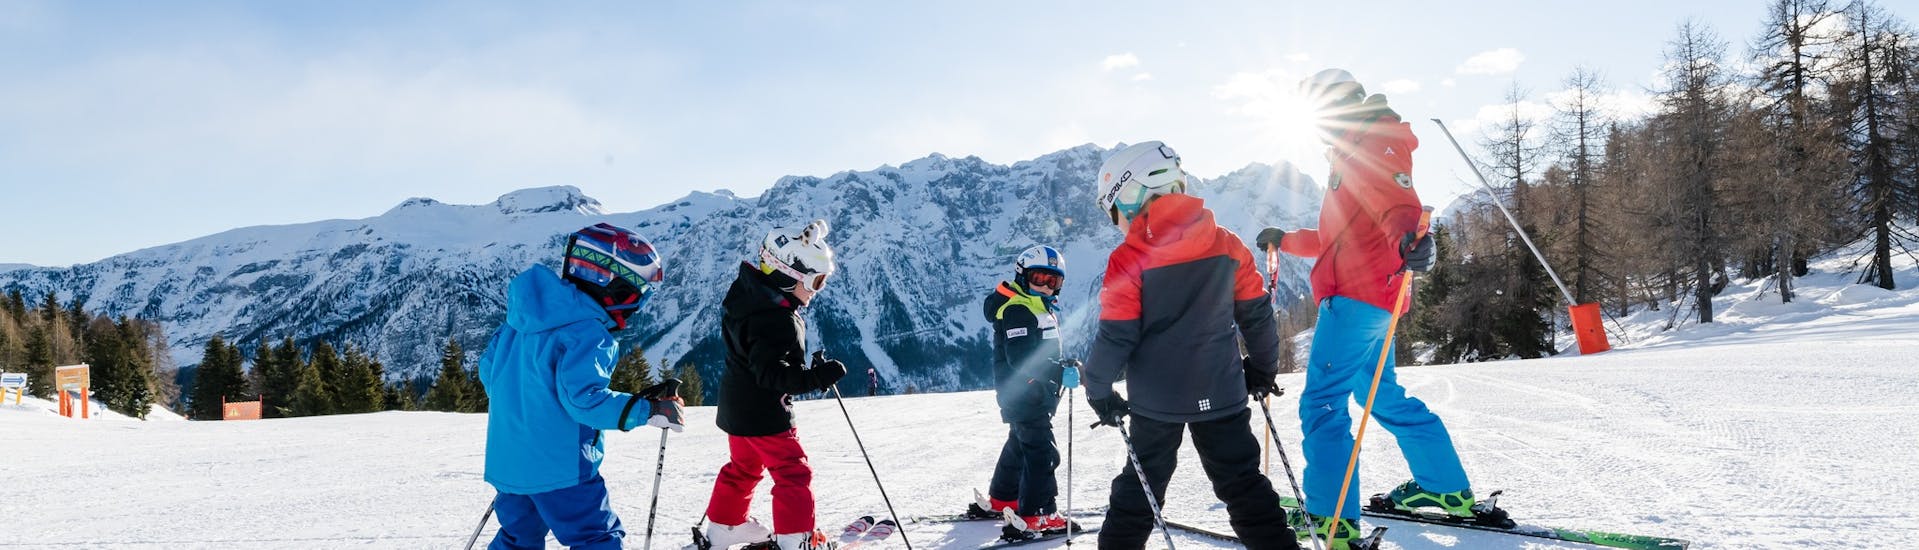 Some kids are listening to their instructor from Scuola Sci Val di Sole during the Kids Ski Lessons (5-14 y.) for All Levels - Junior Fun.